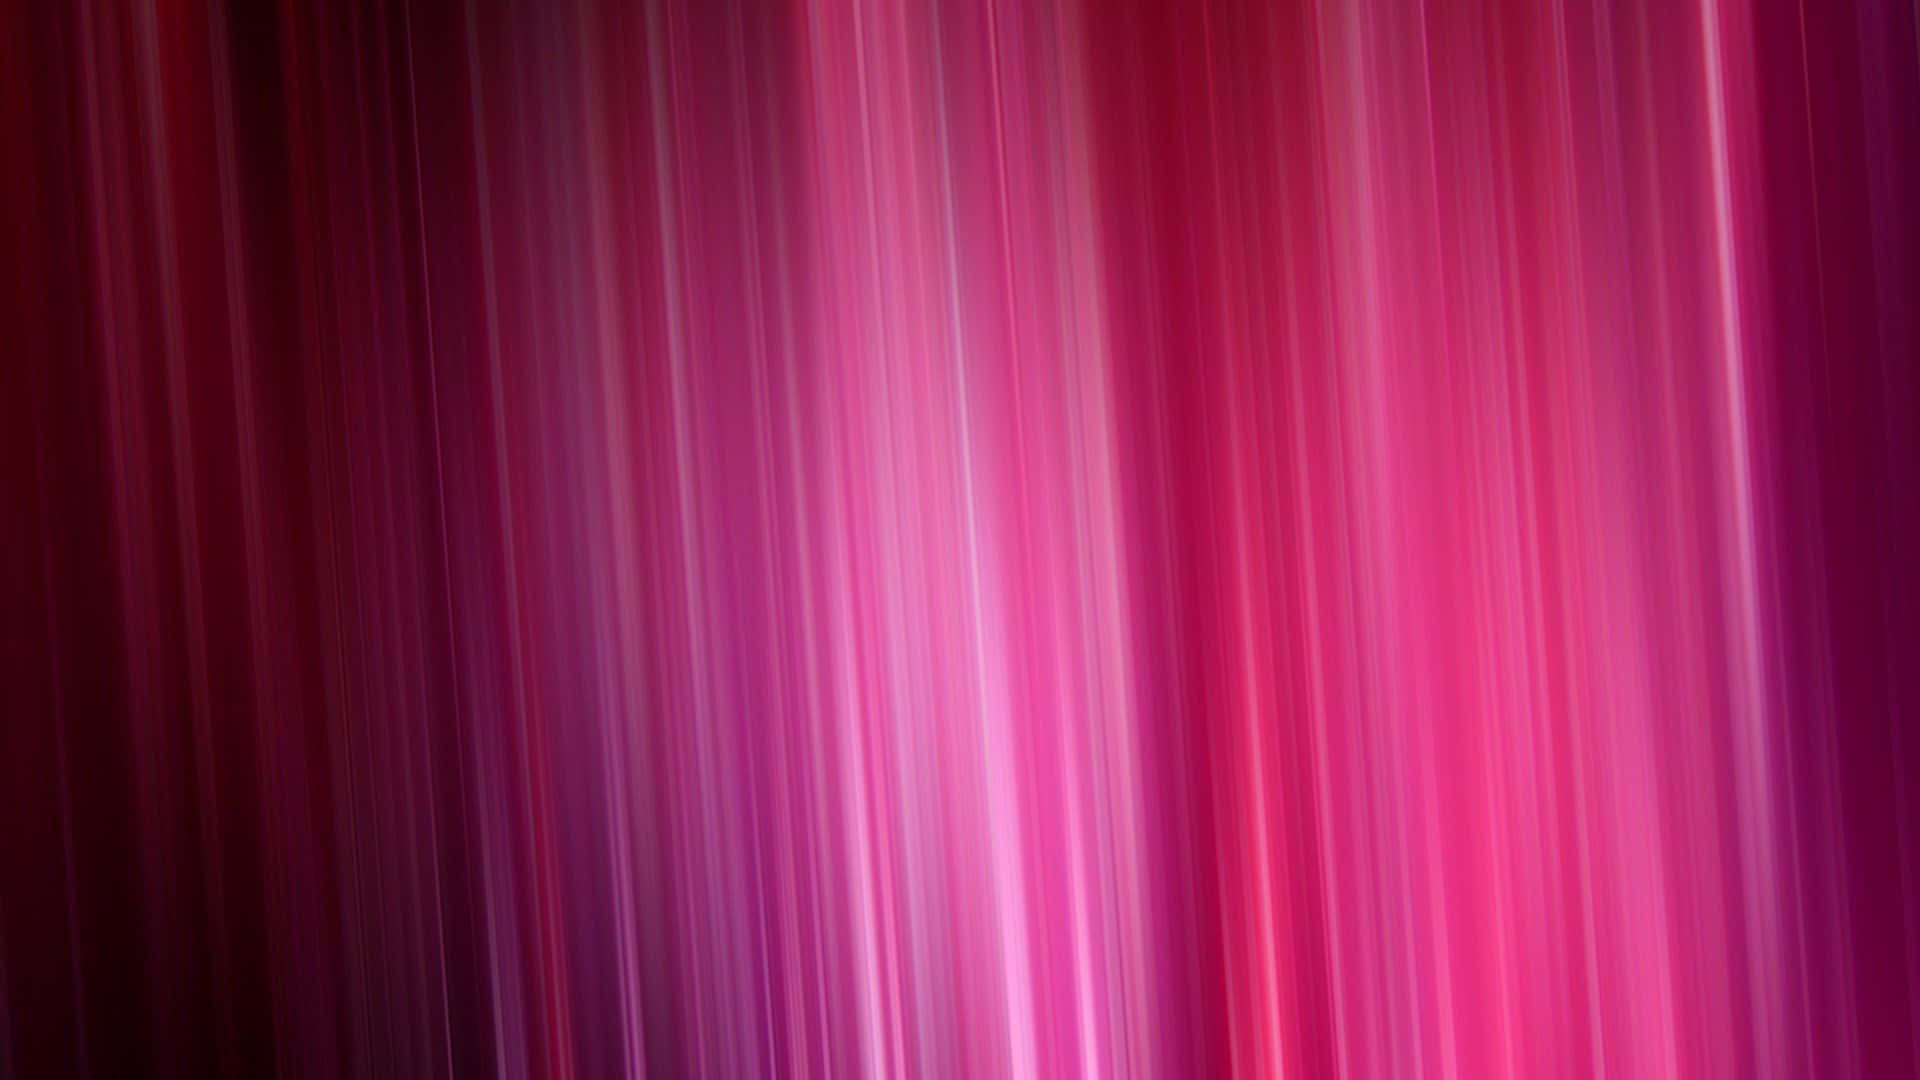 A Pink And Purple Abstract Background With Lines